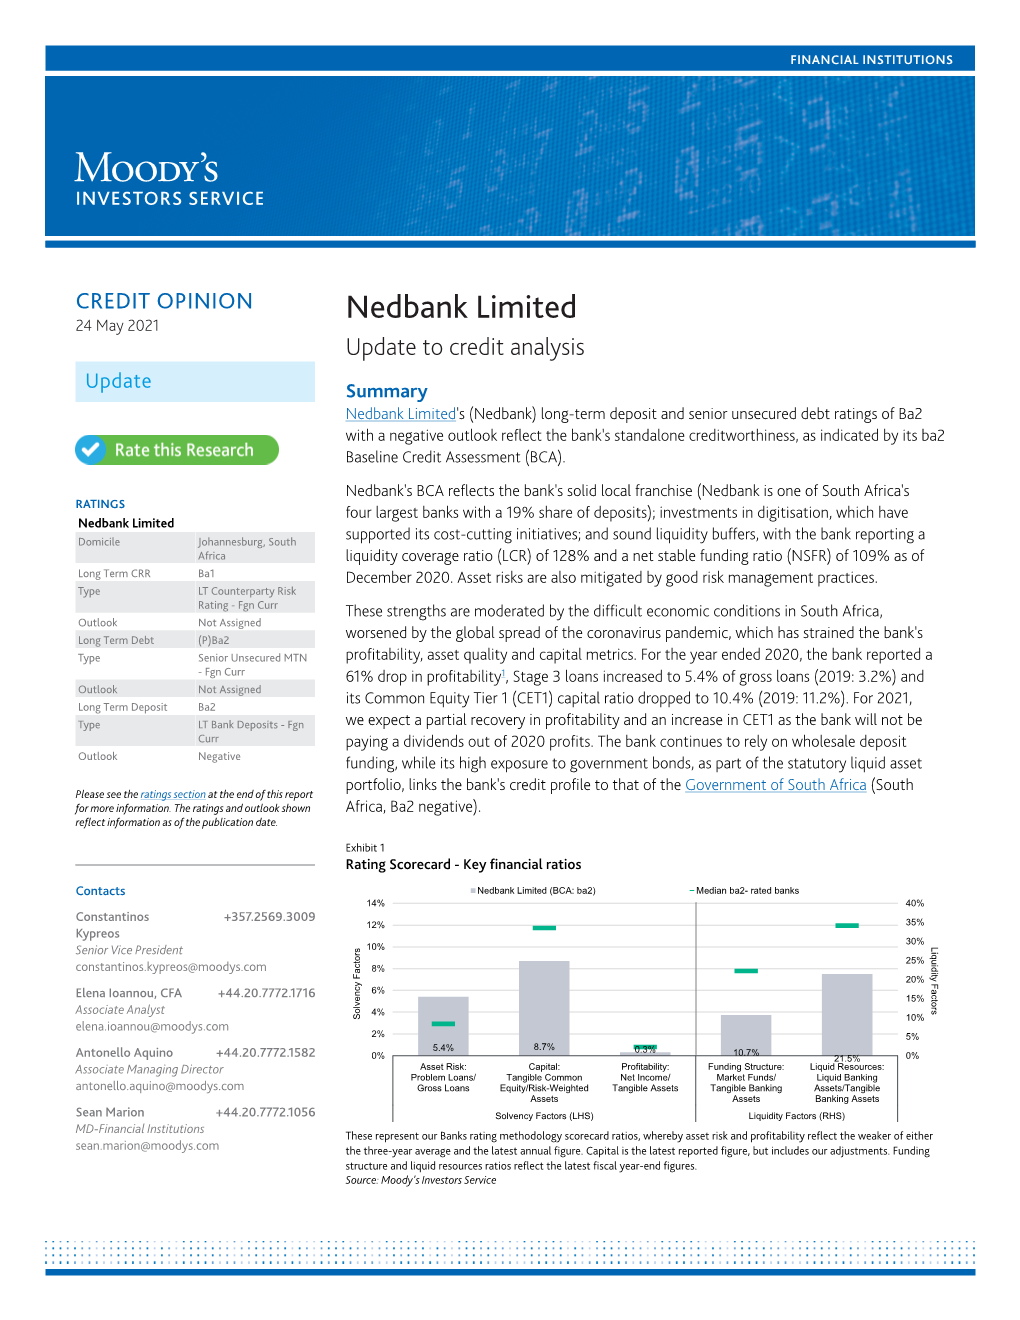 Moody's: Nedbank Limited Update to Credit Analysis